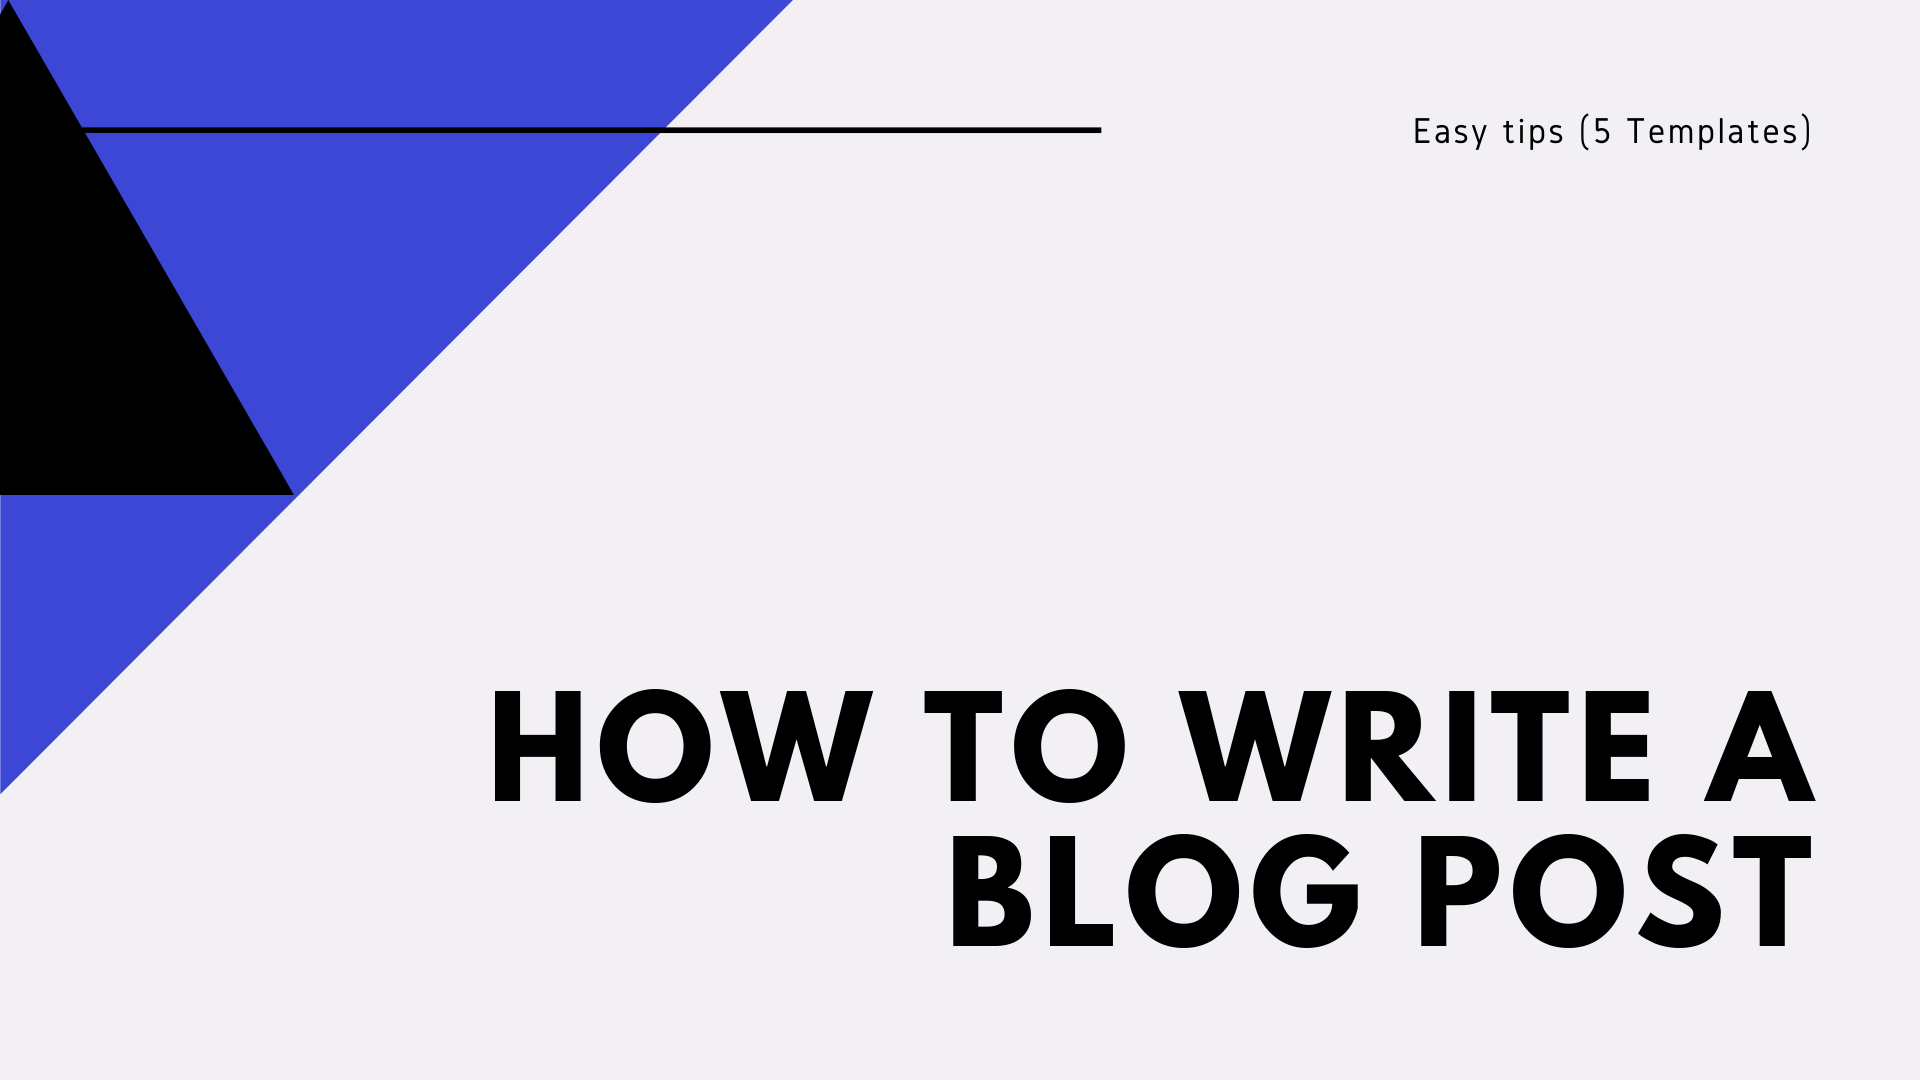 How to write a Blog post: Easy tips (5 Templates)